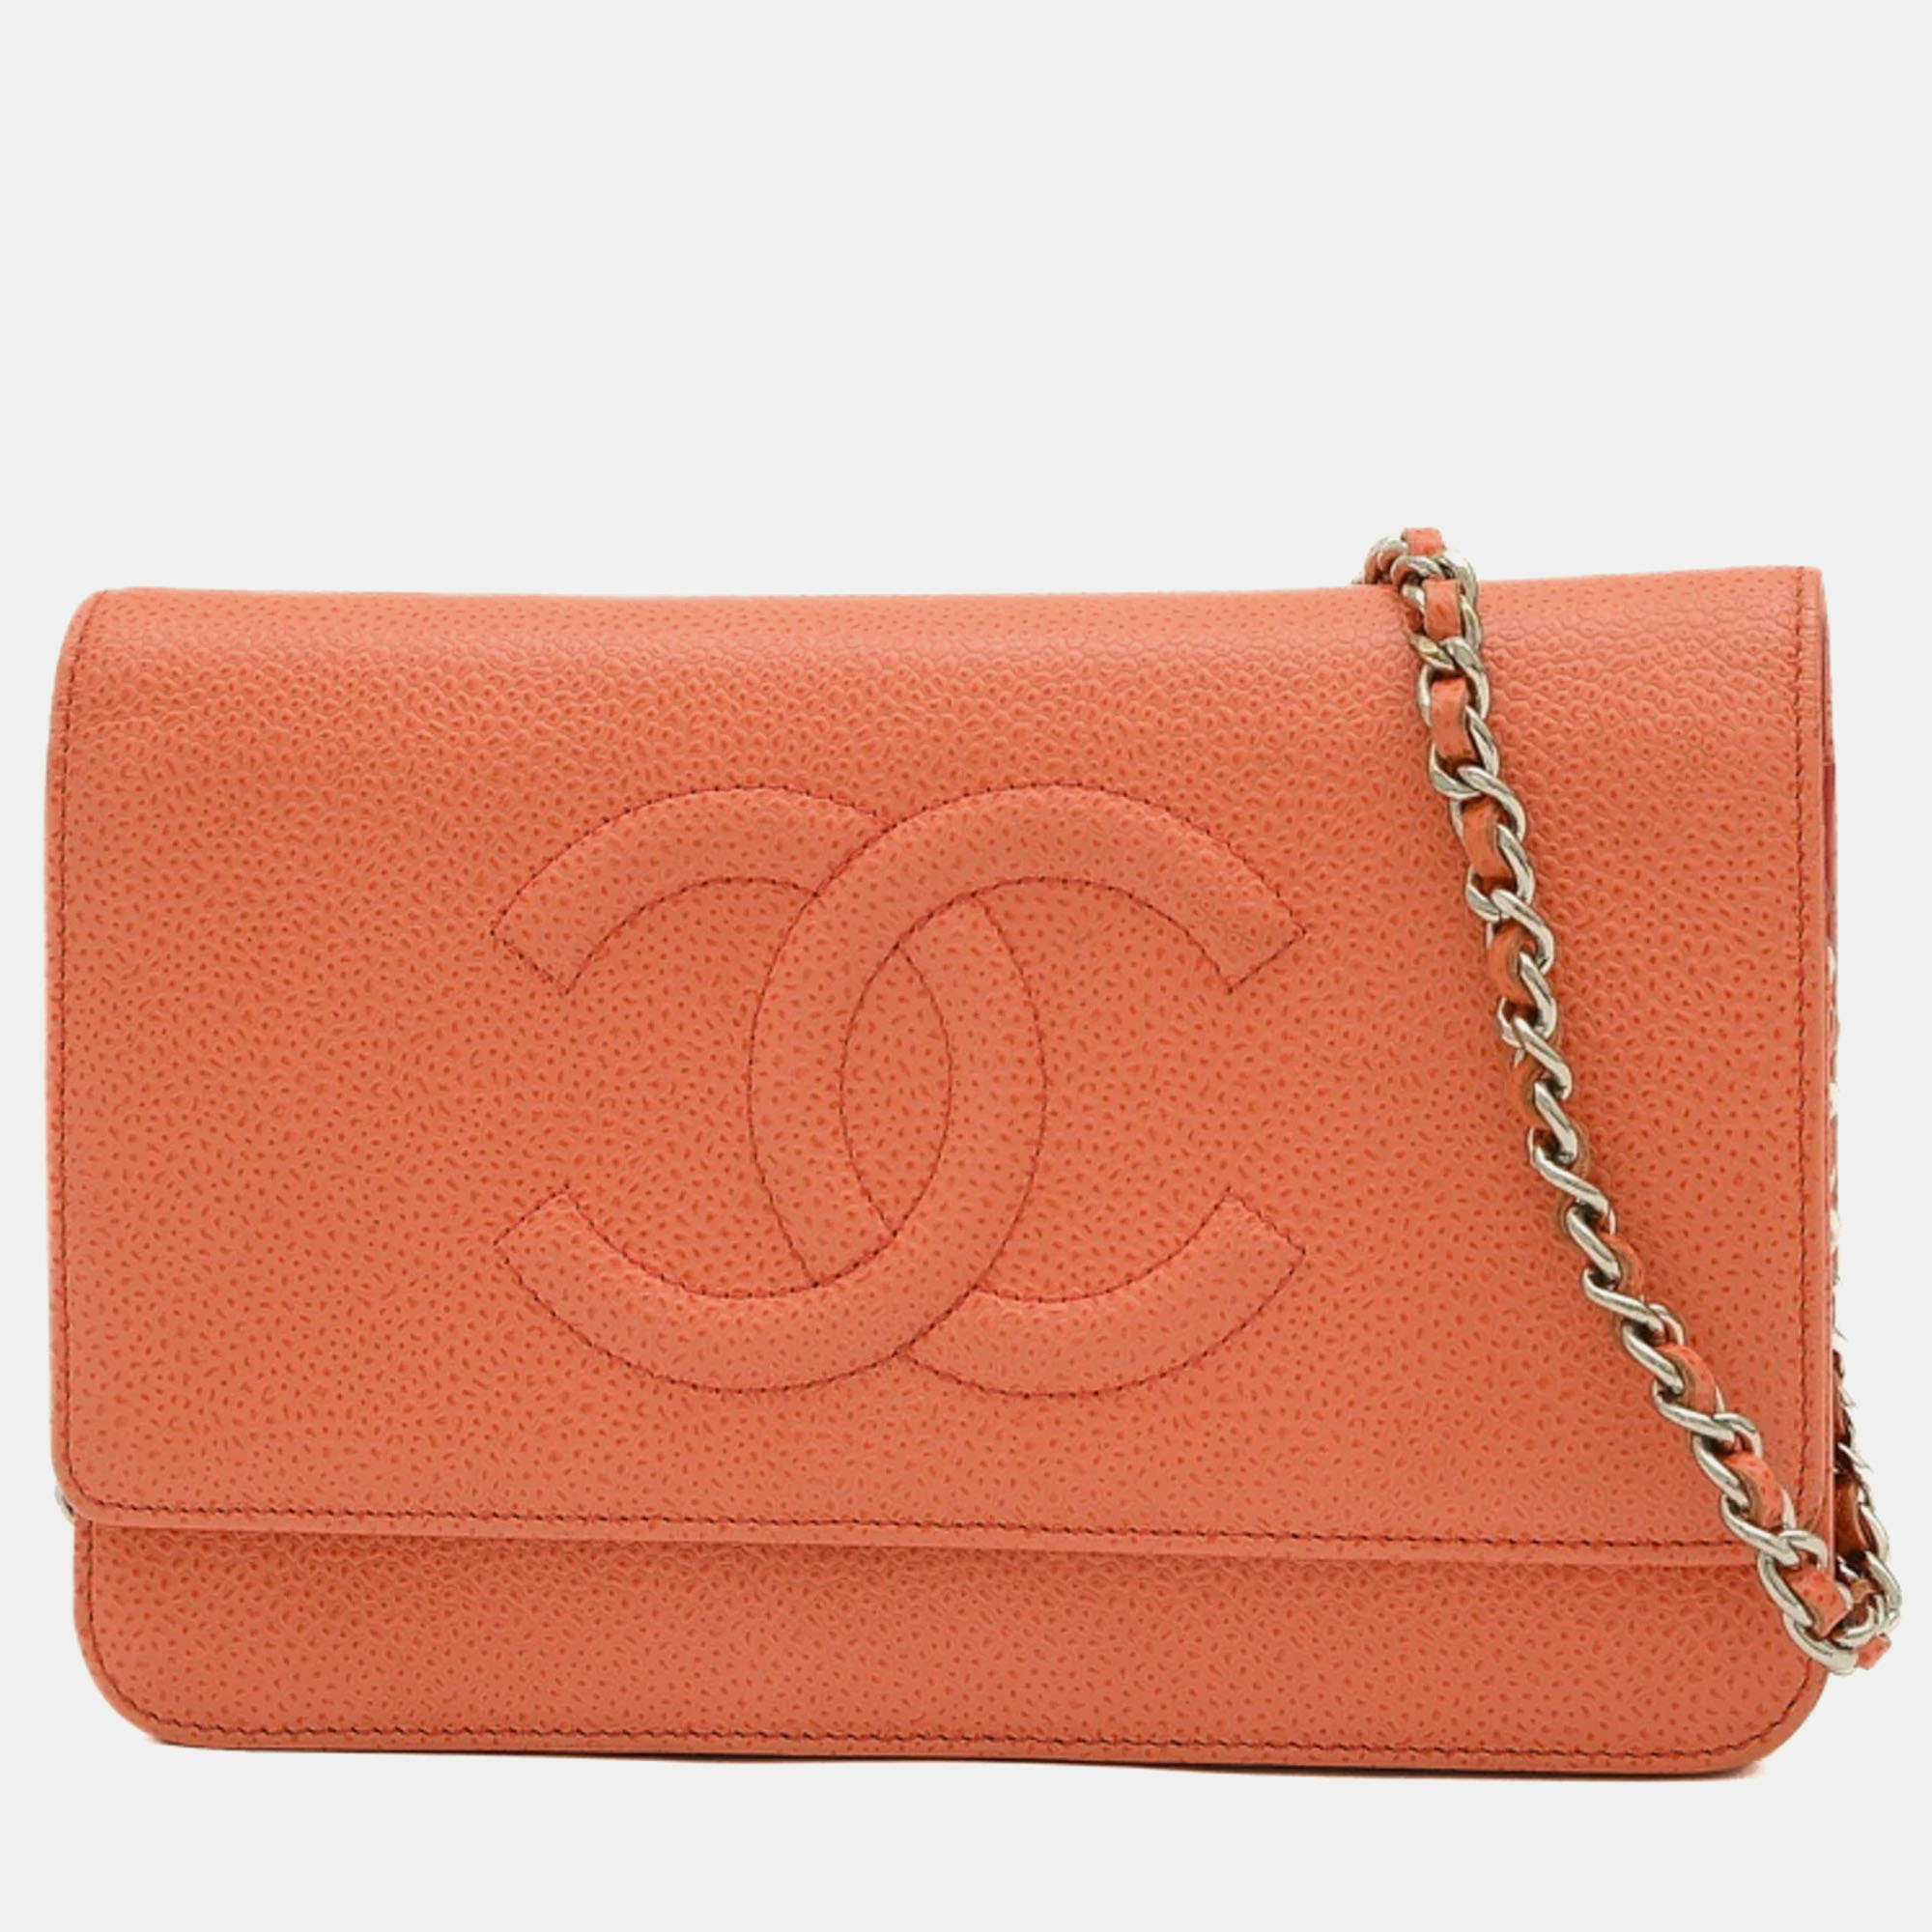 Chanel orange leather chain wallet on chain